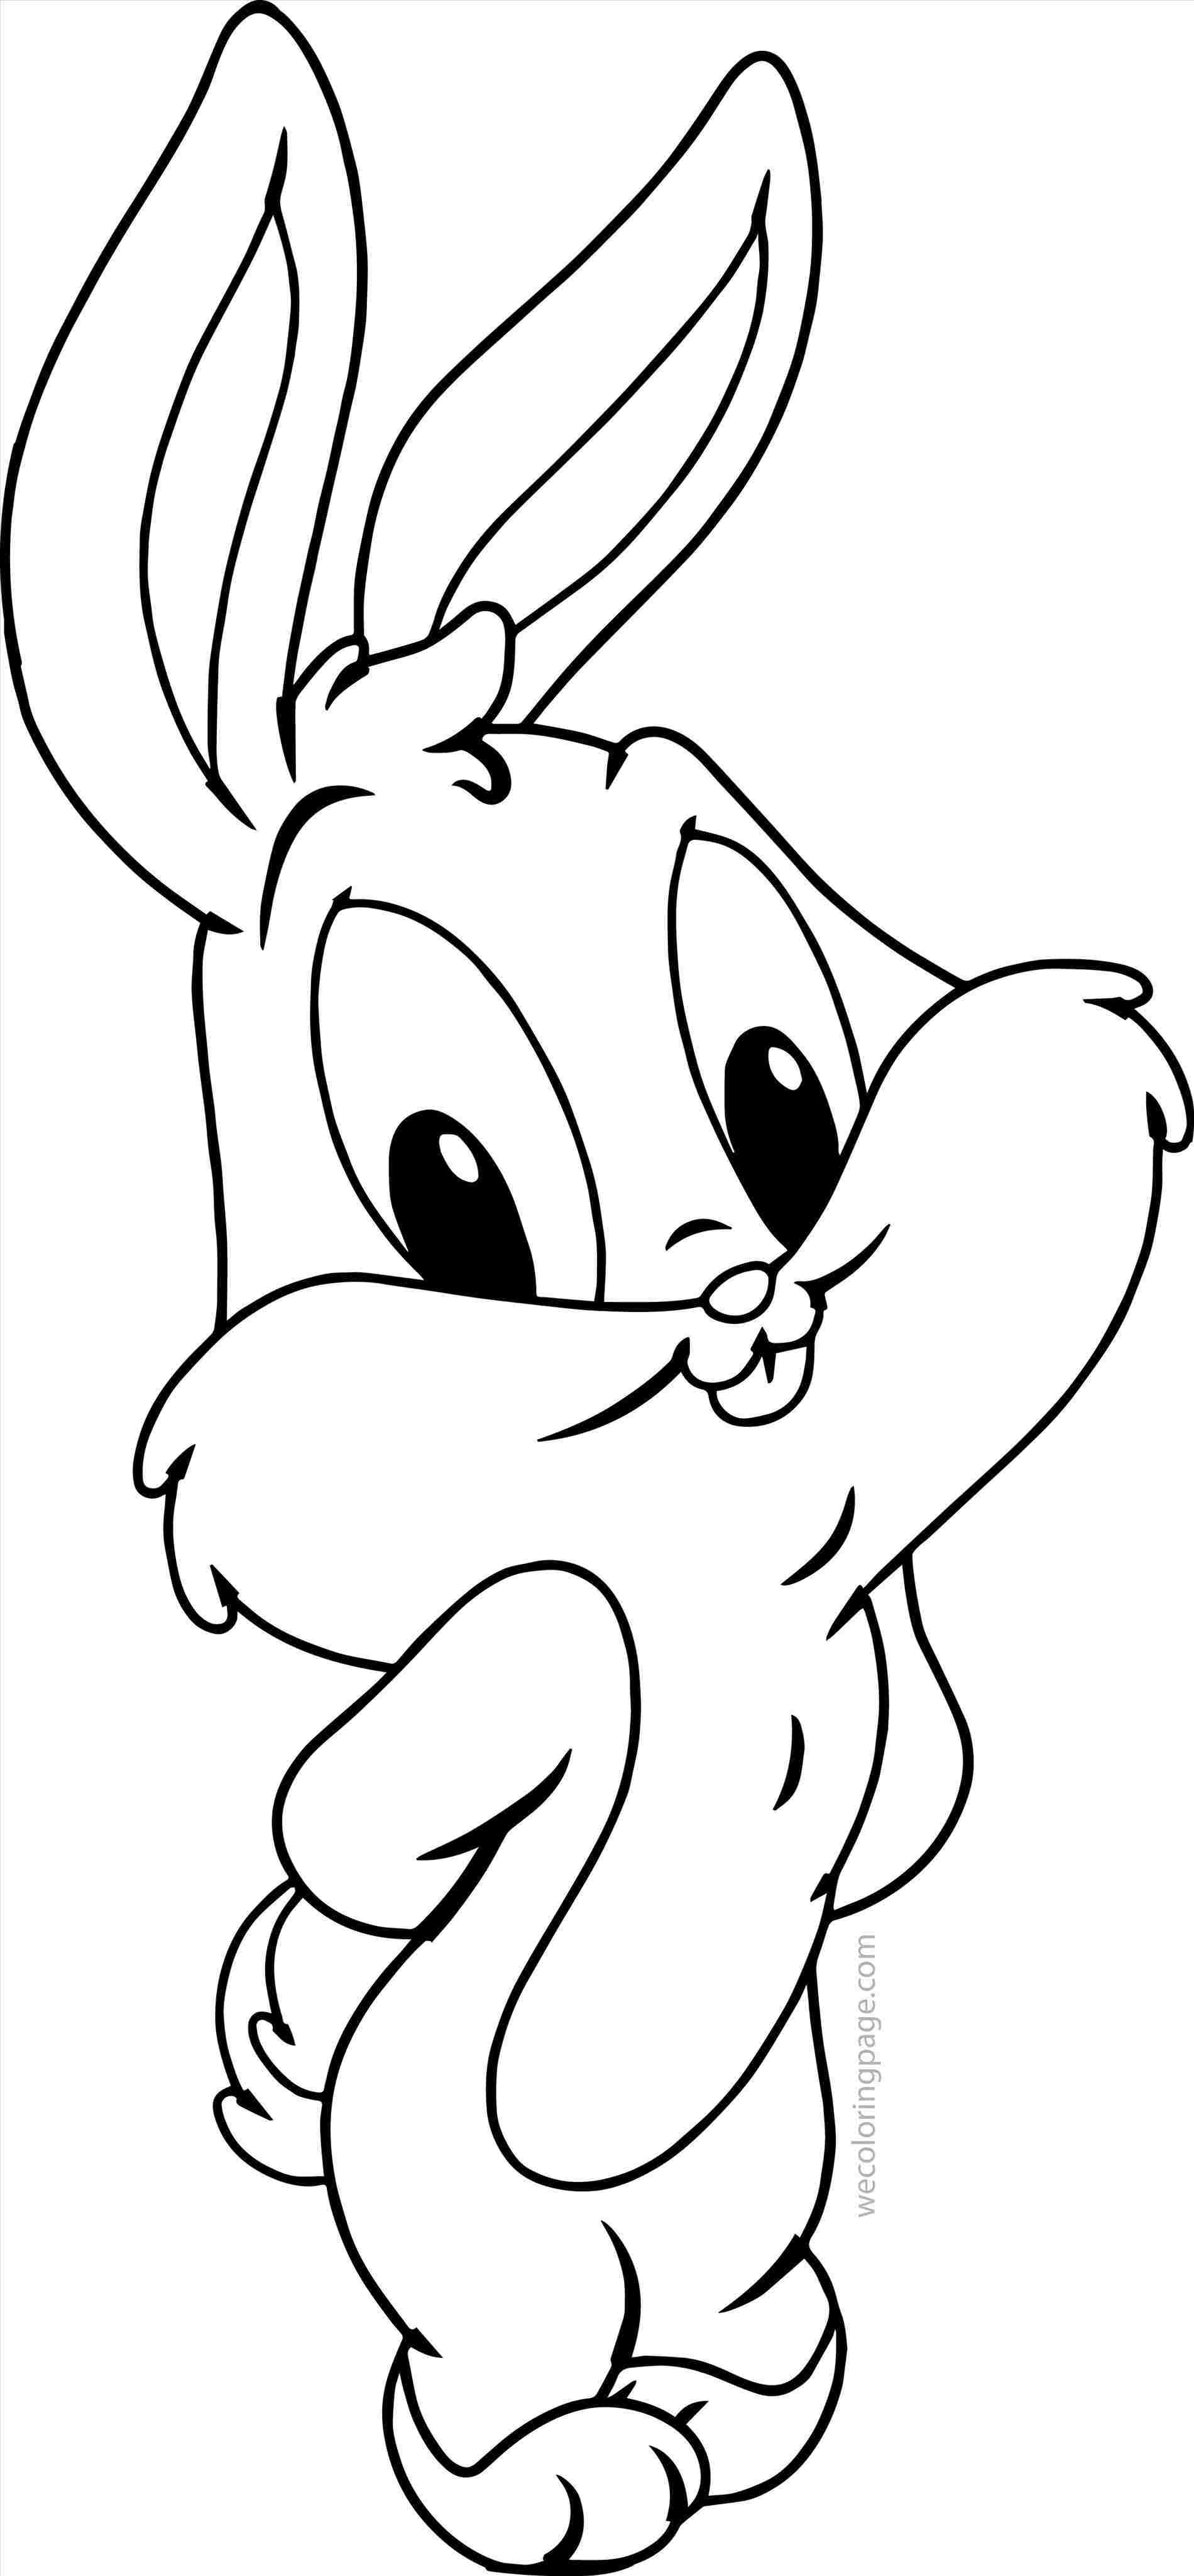 Bugs Bunny Cartoon Drawing | Free download on ClipArtMag